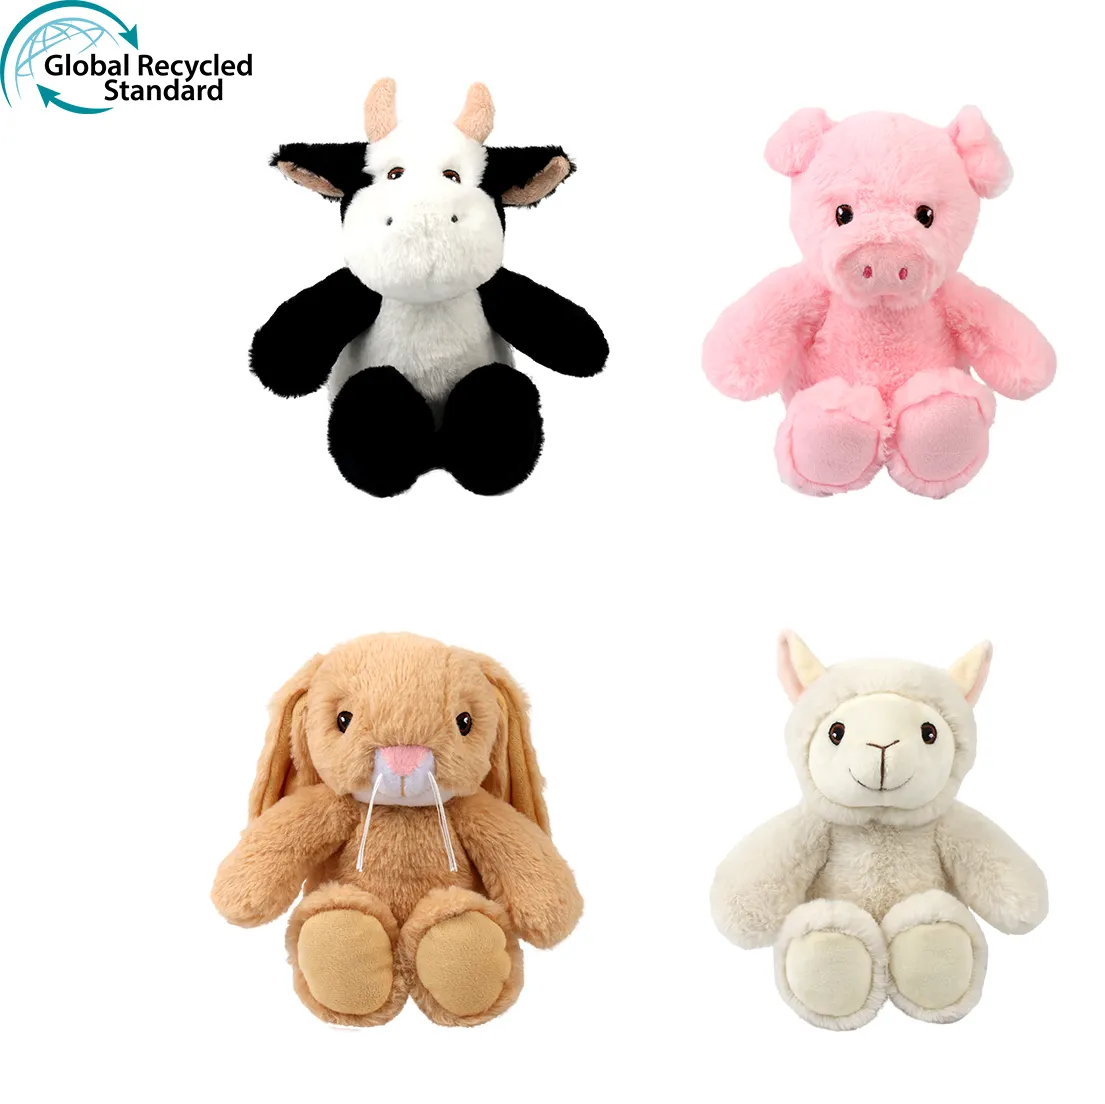 ECO- friendly recycled material stuffed soft plush farm animal toy